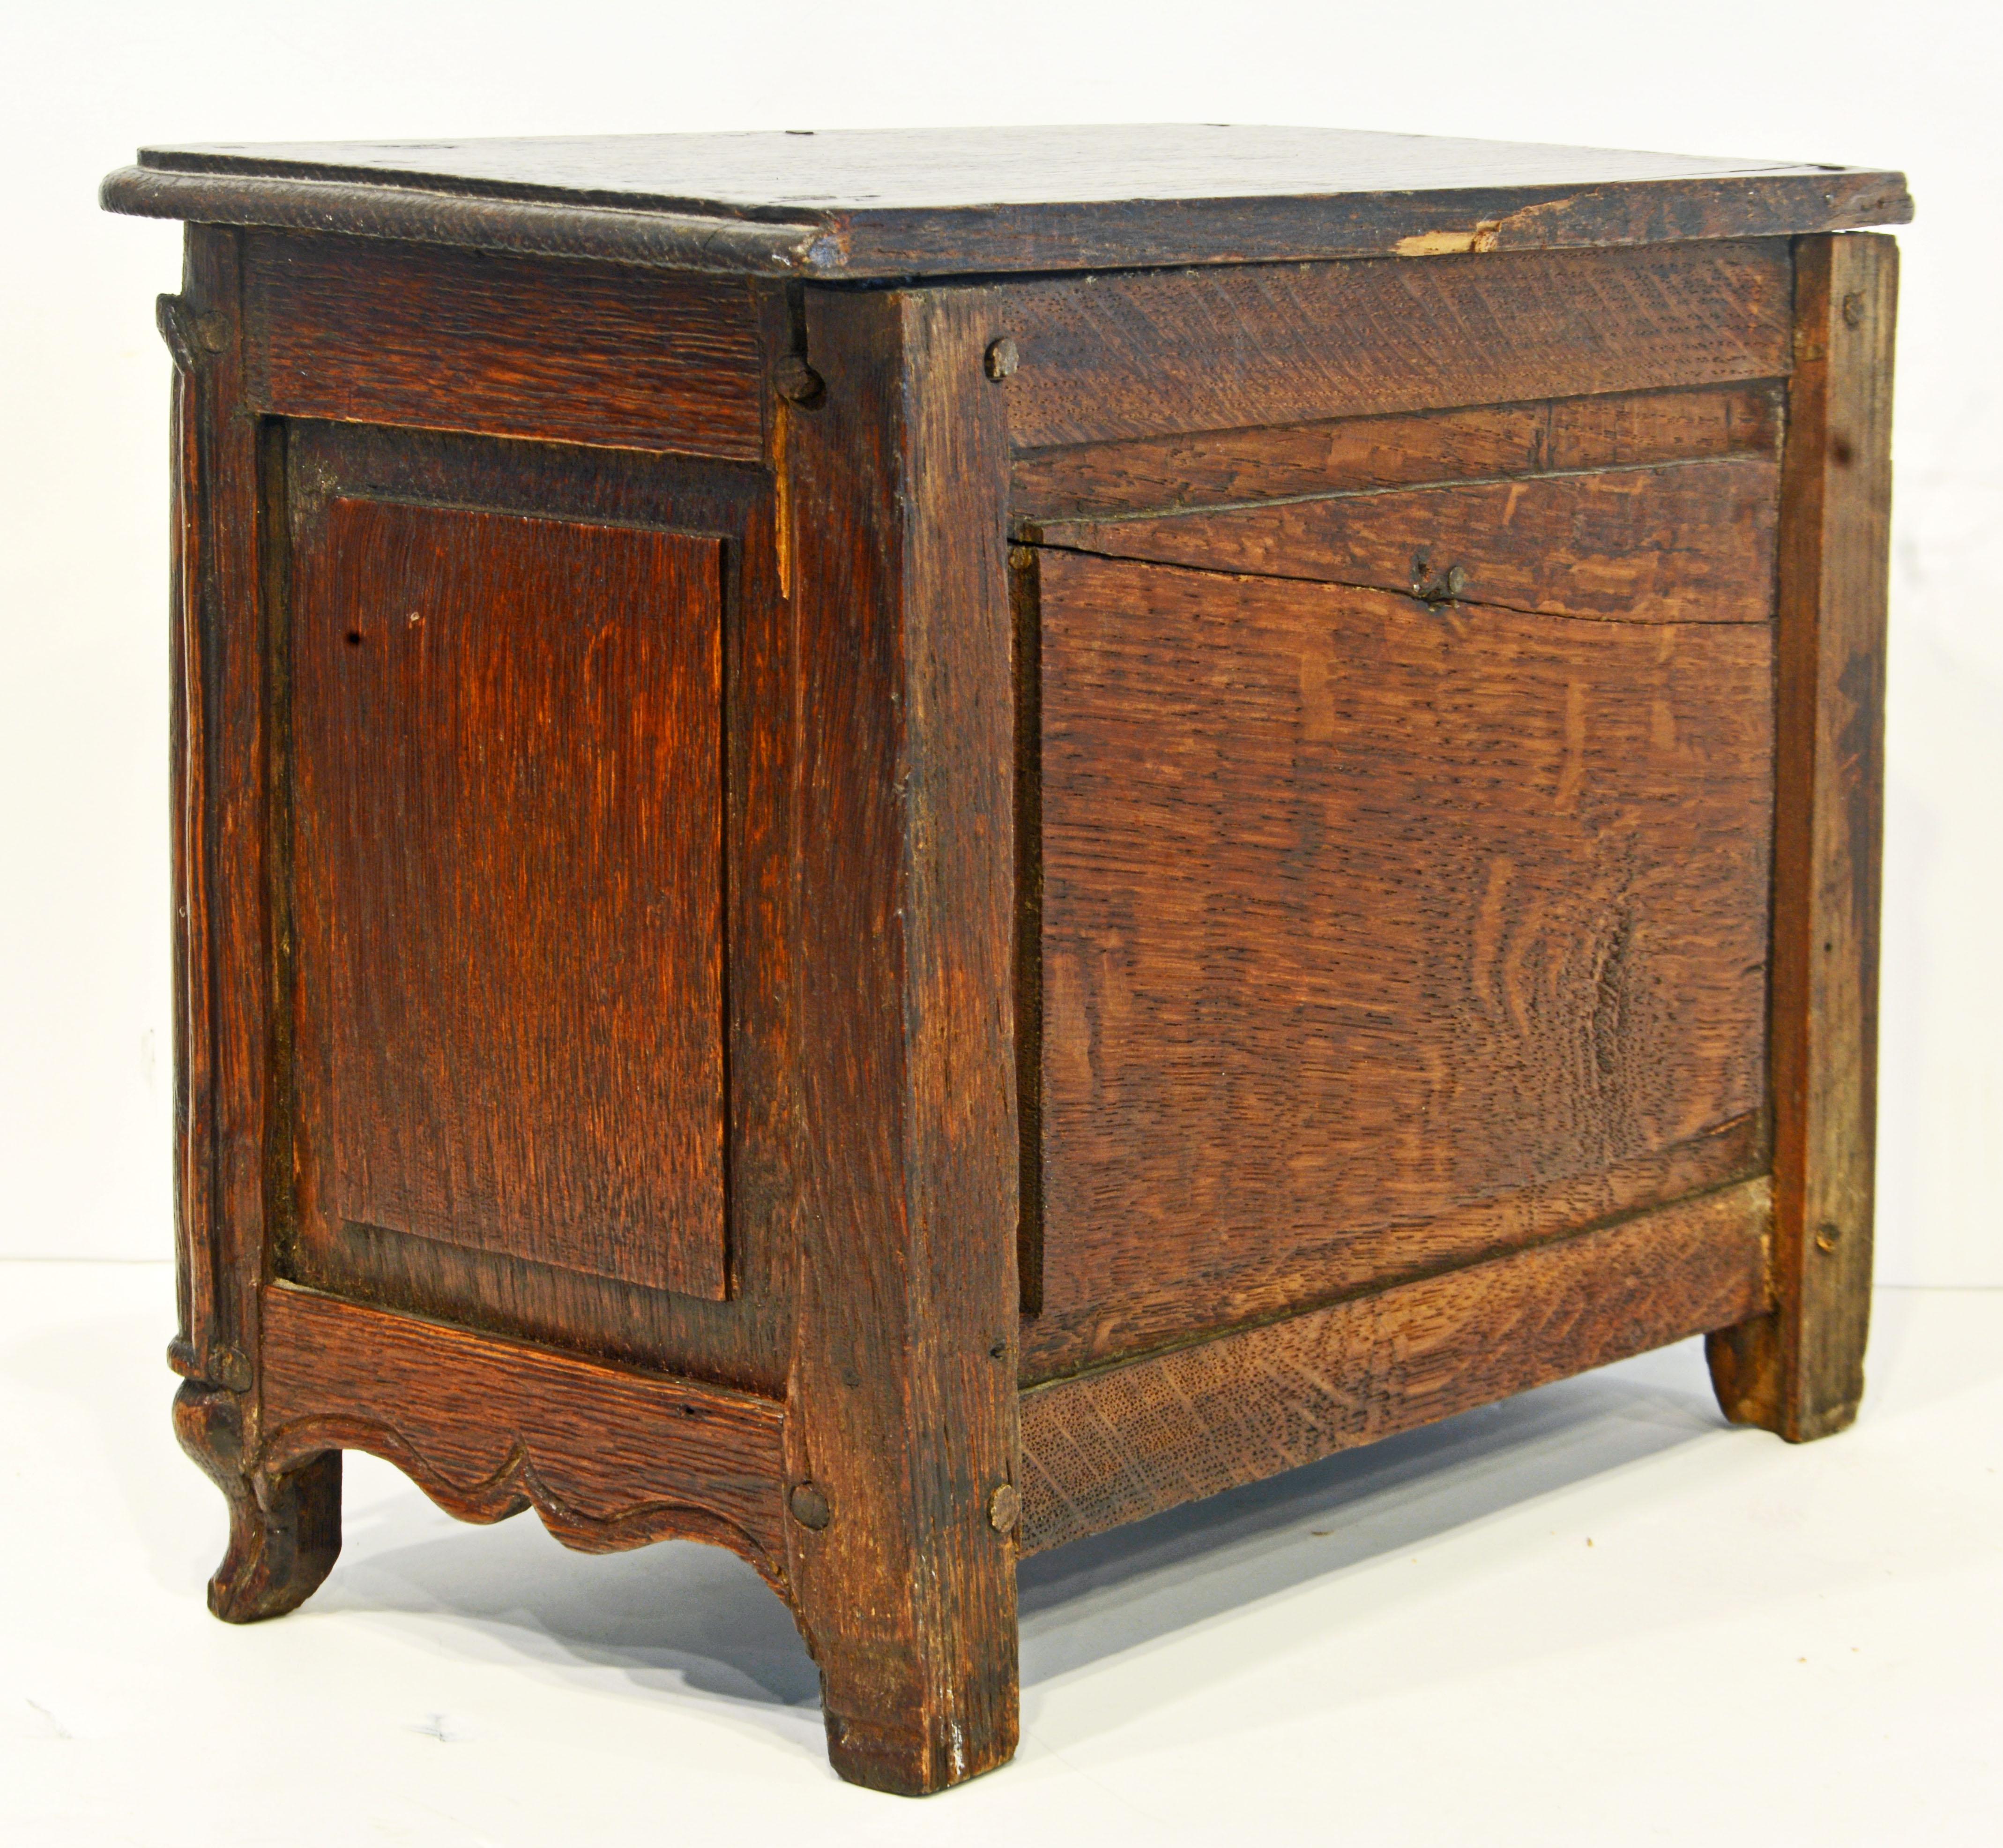 Hand-Carved French Provincial Carved Louis XV Style Miniature Commode, Early 19th Century